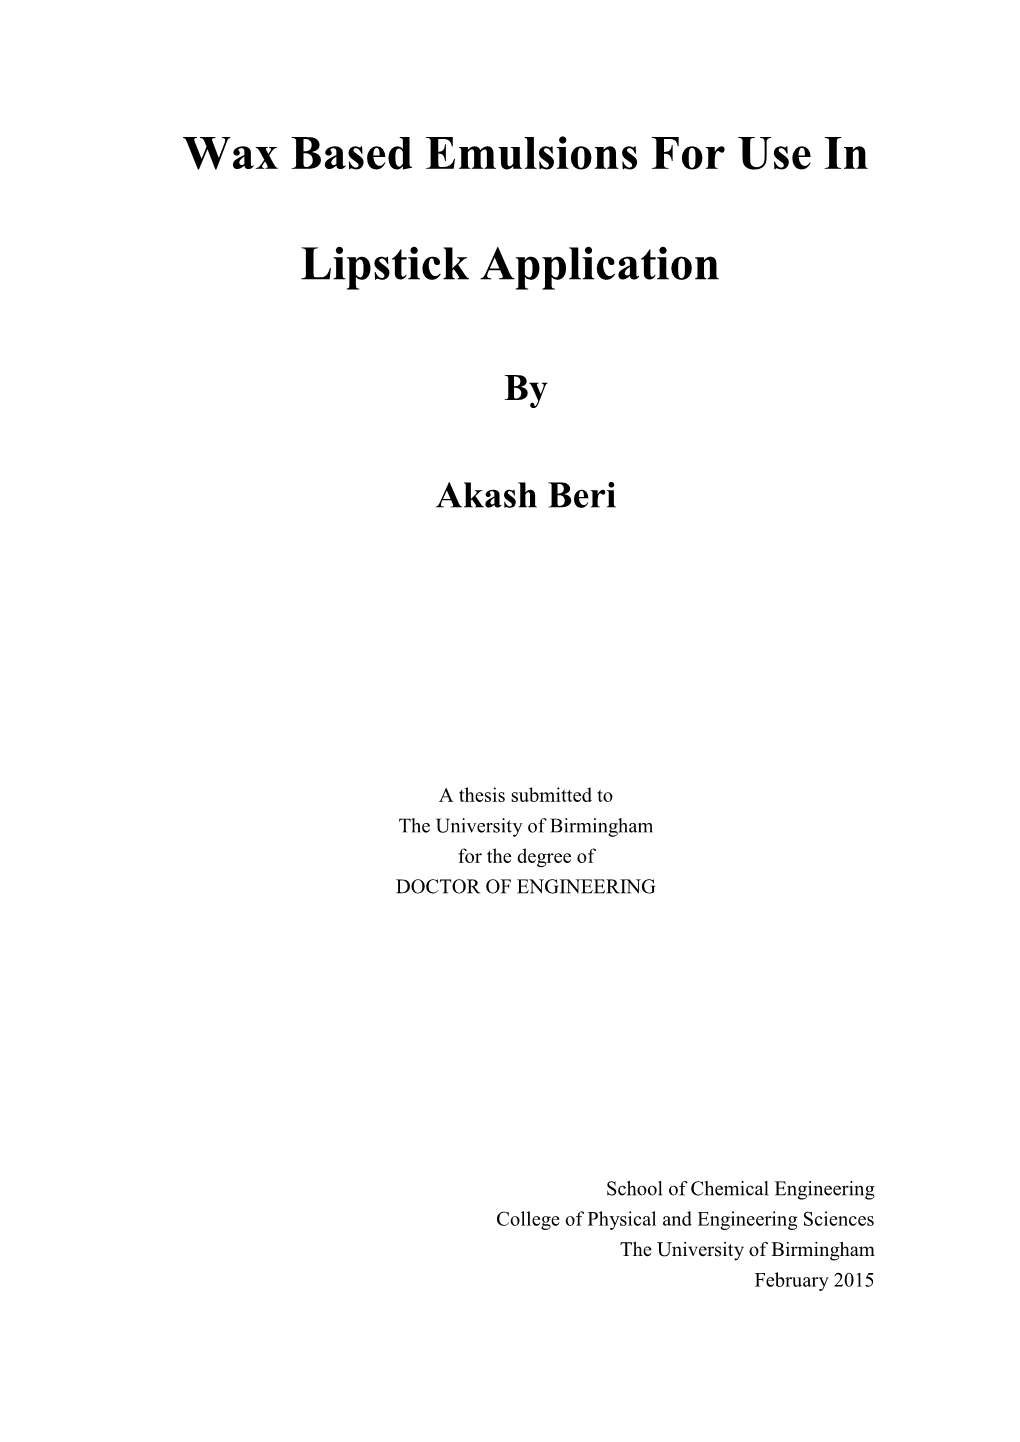 Wax Based Emulsions for Use in Lipstick Application